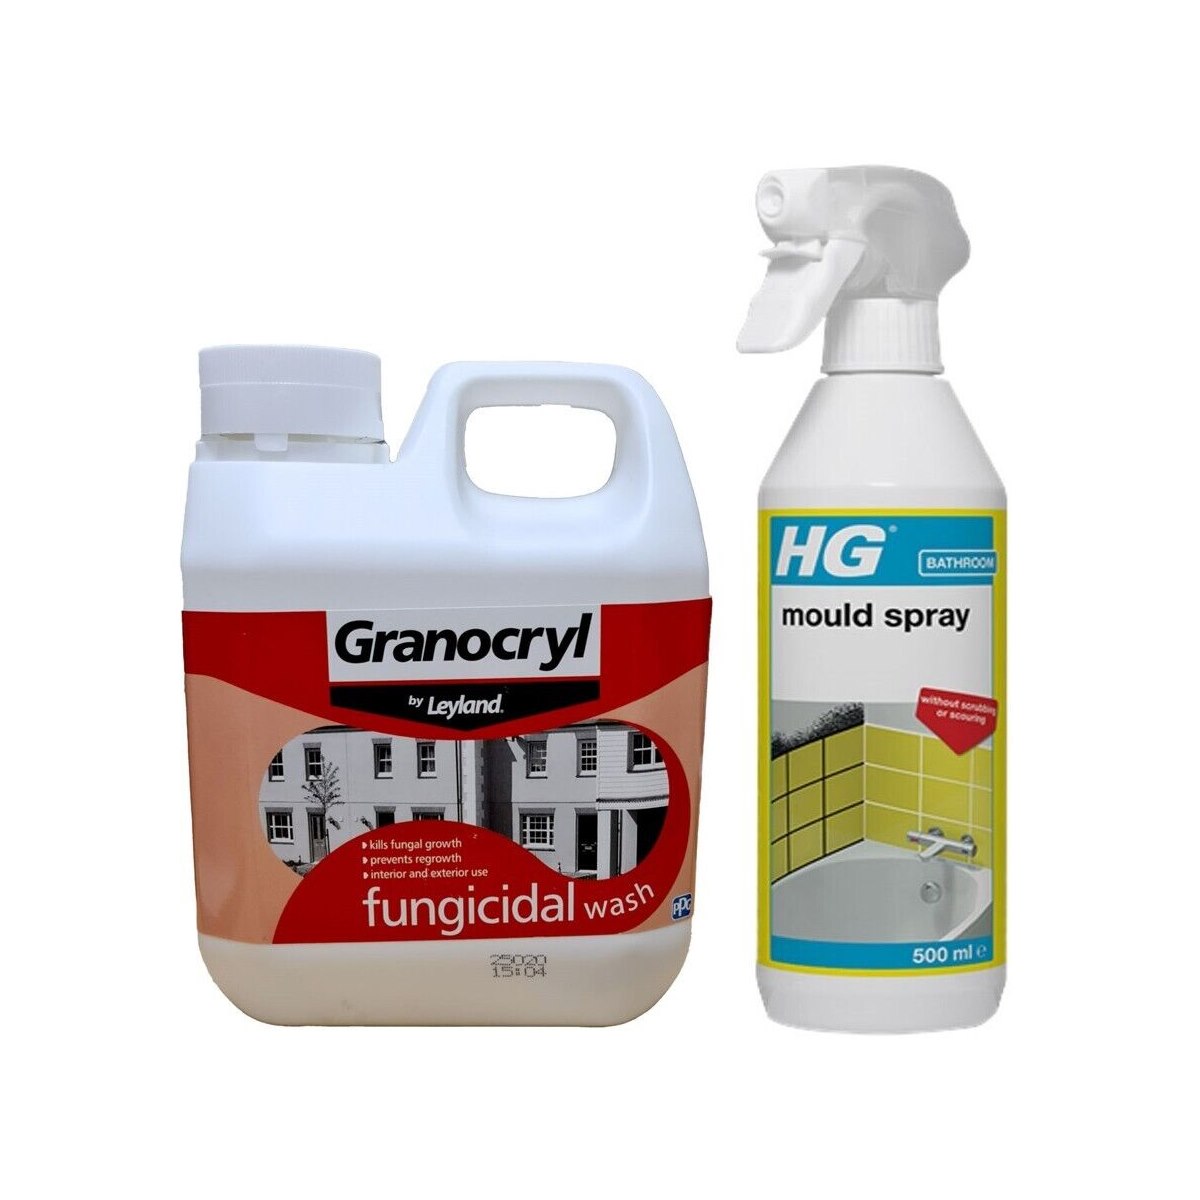 Black Mould Anti-Mould Remover Kit includes HG Mould Spray 500ml